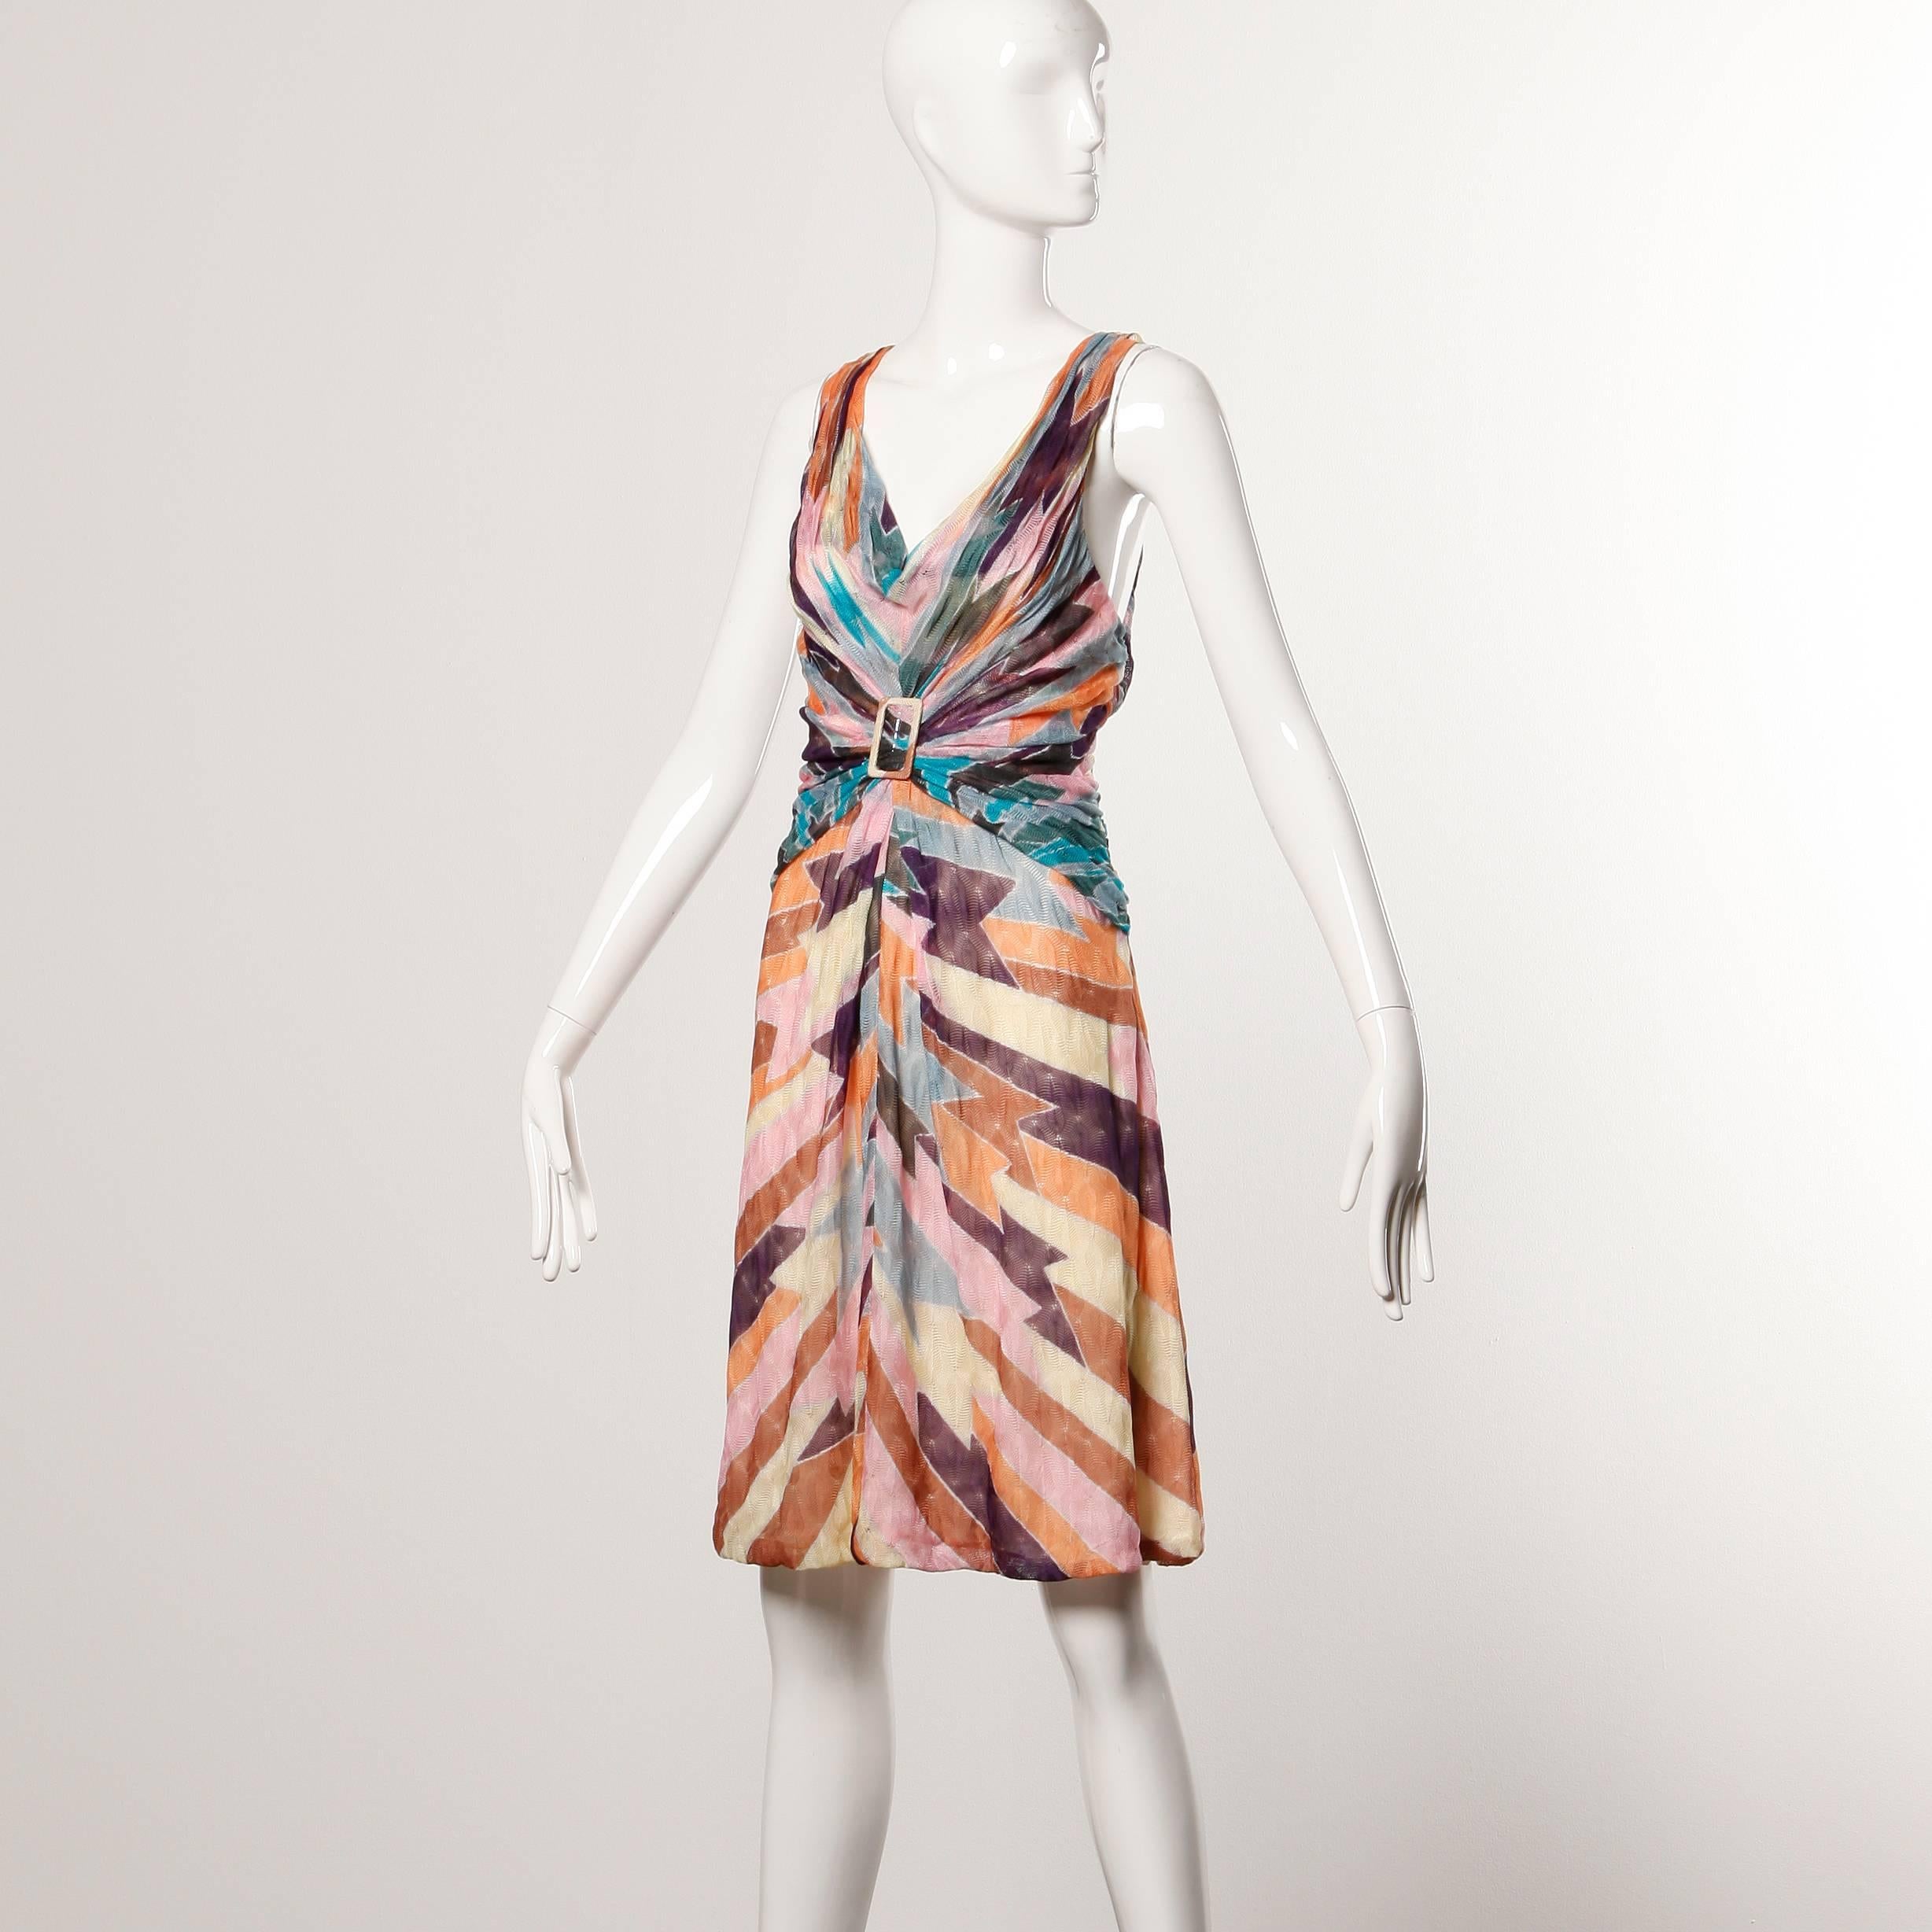 Colorful knit Missoni dress with ruched buckle detail in front and in back.

Details: 

Partially Lined in Silk
Side Zip Closure
Estimated Size: Medium
Color: Purple/ Blue/ Tan/ Yellow/ Grey
Fabric: 100% Rayon Knit
Label: